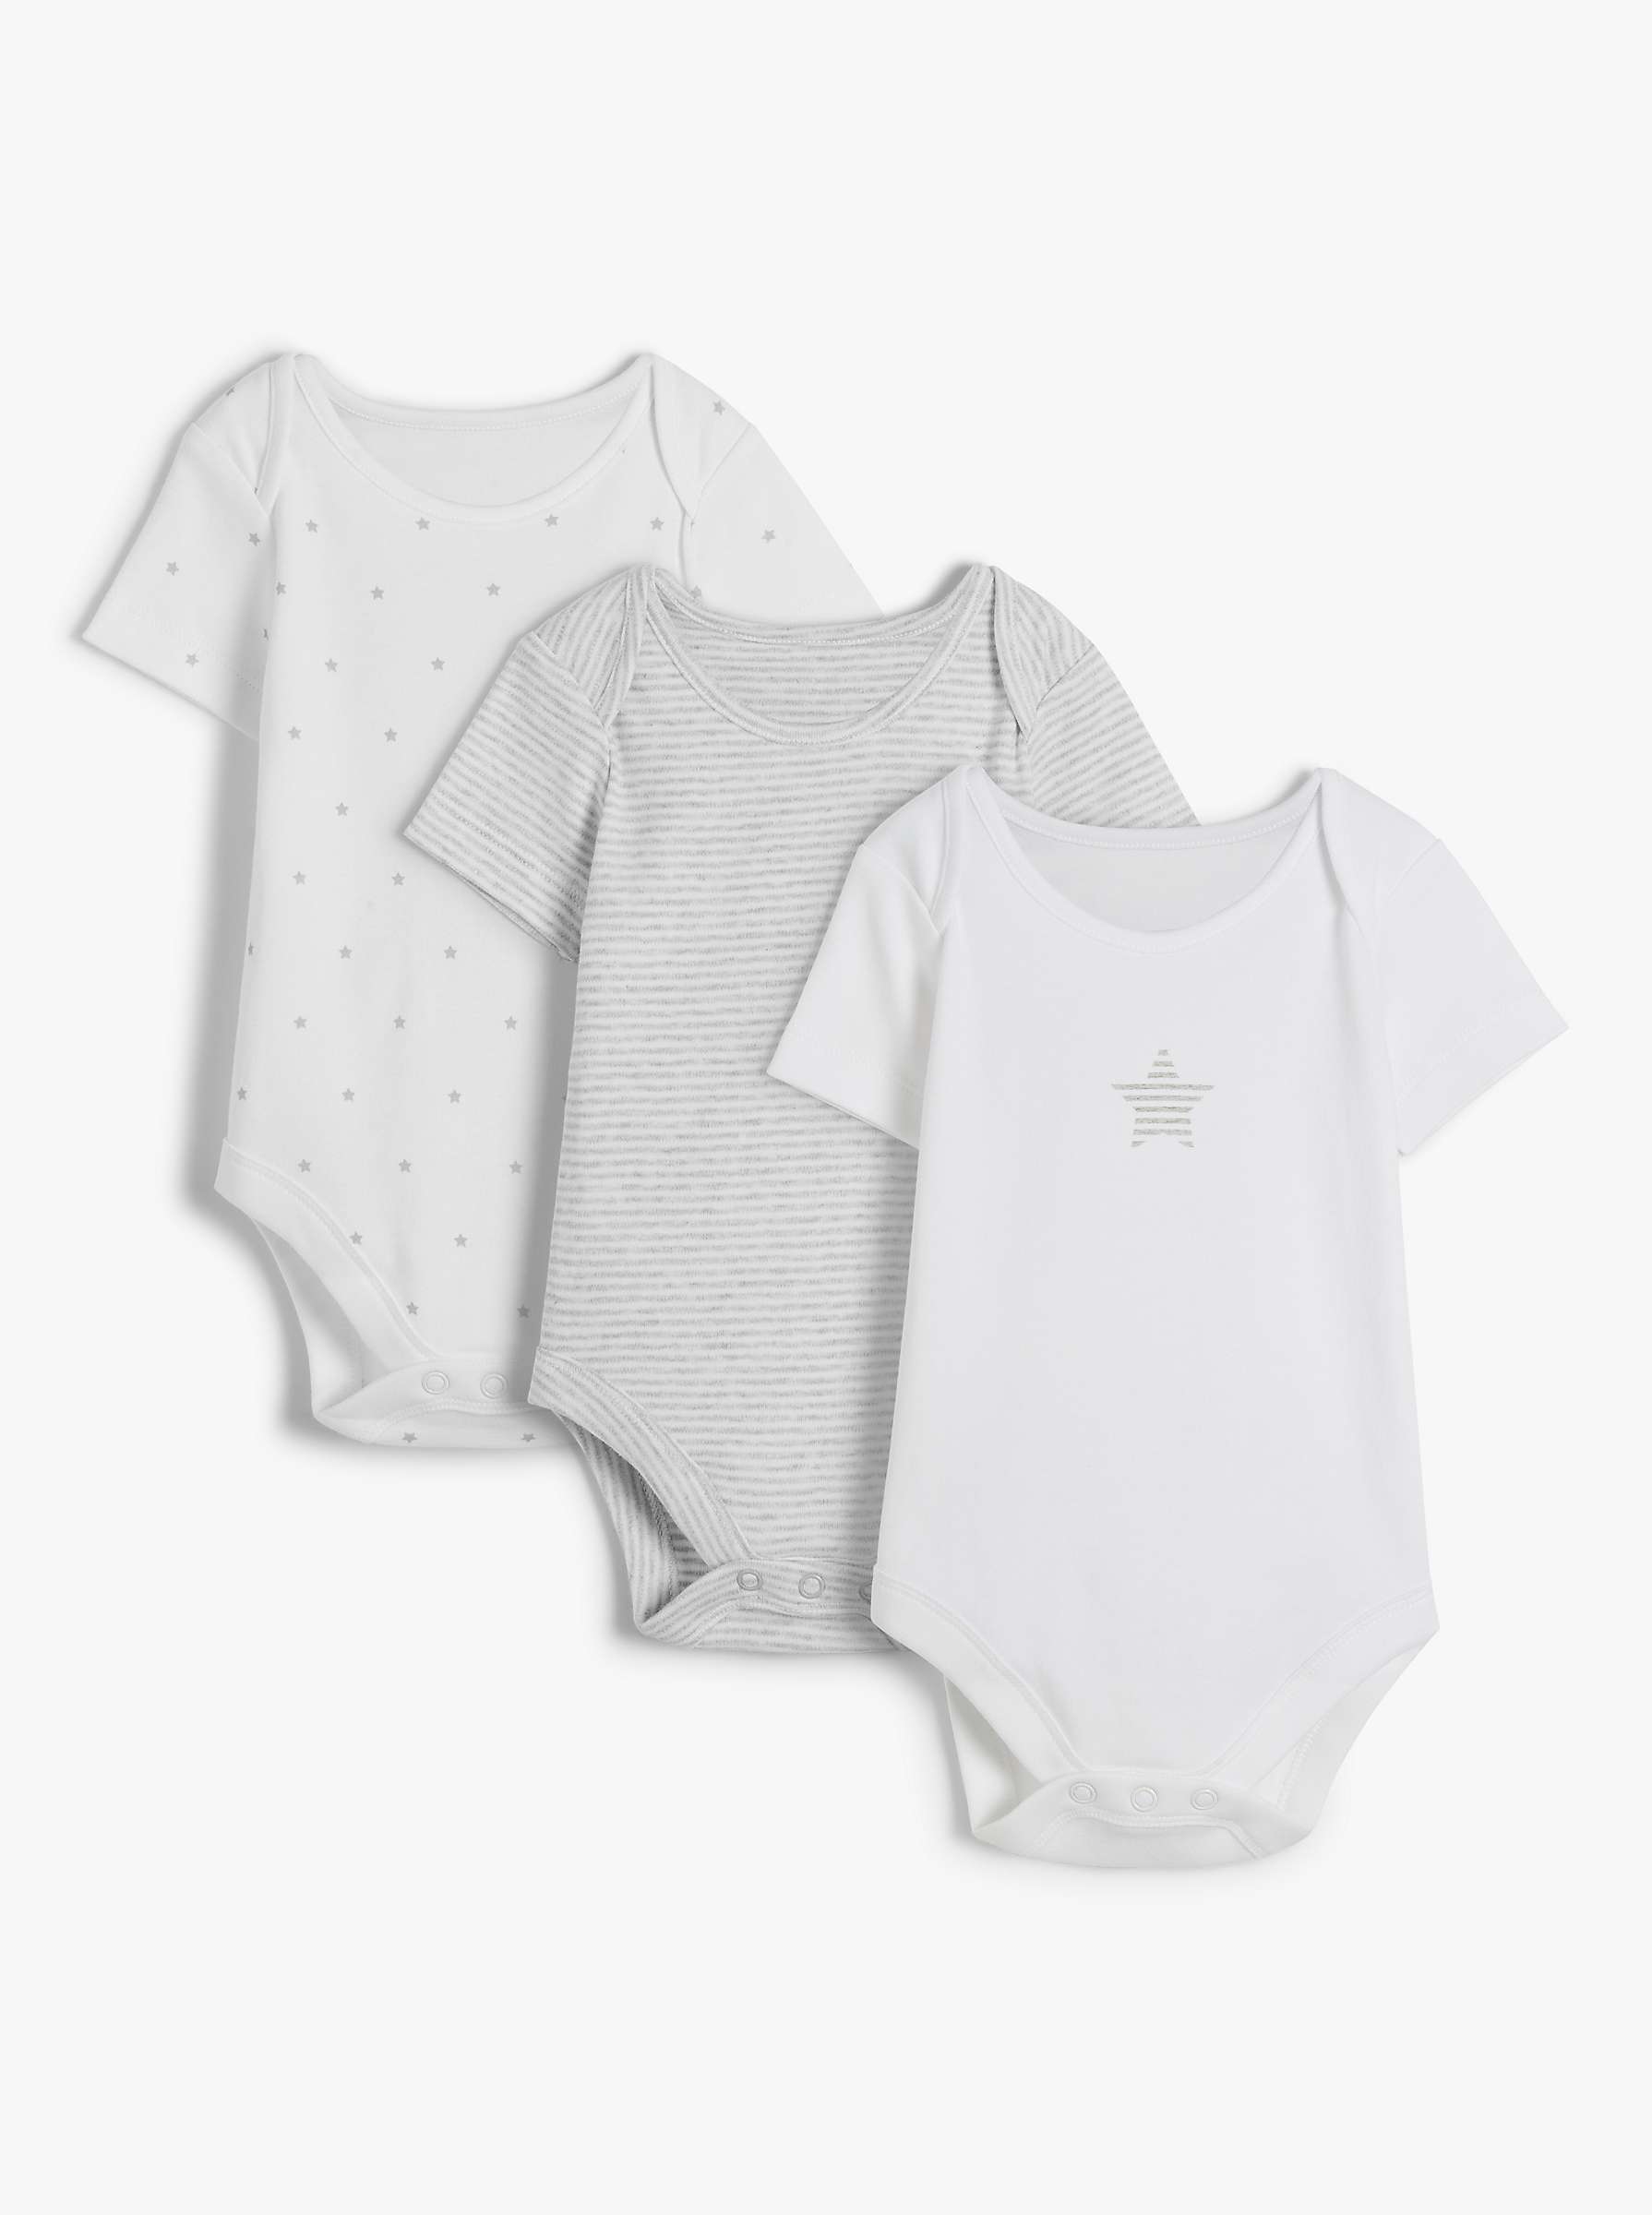 John Lewis Baby GOTS Organic Cotton Stars and Stripe Bodysuits, Pack of ...